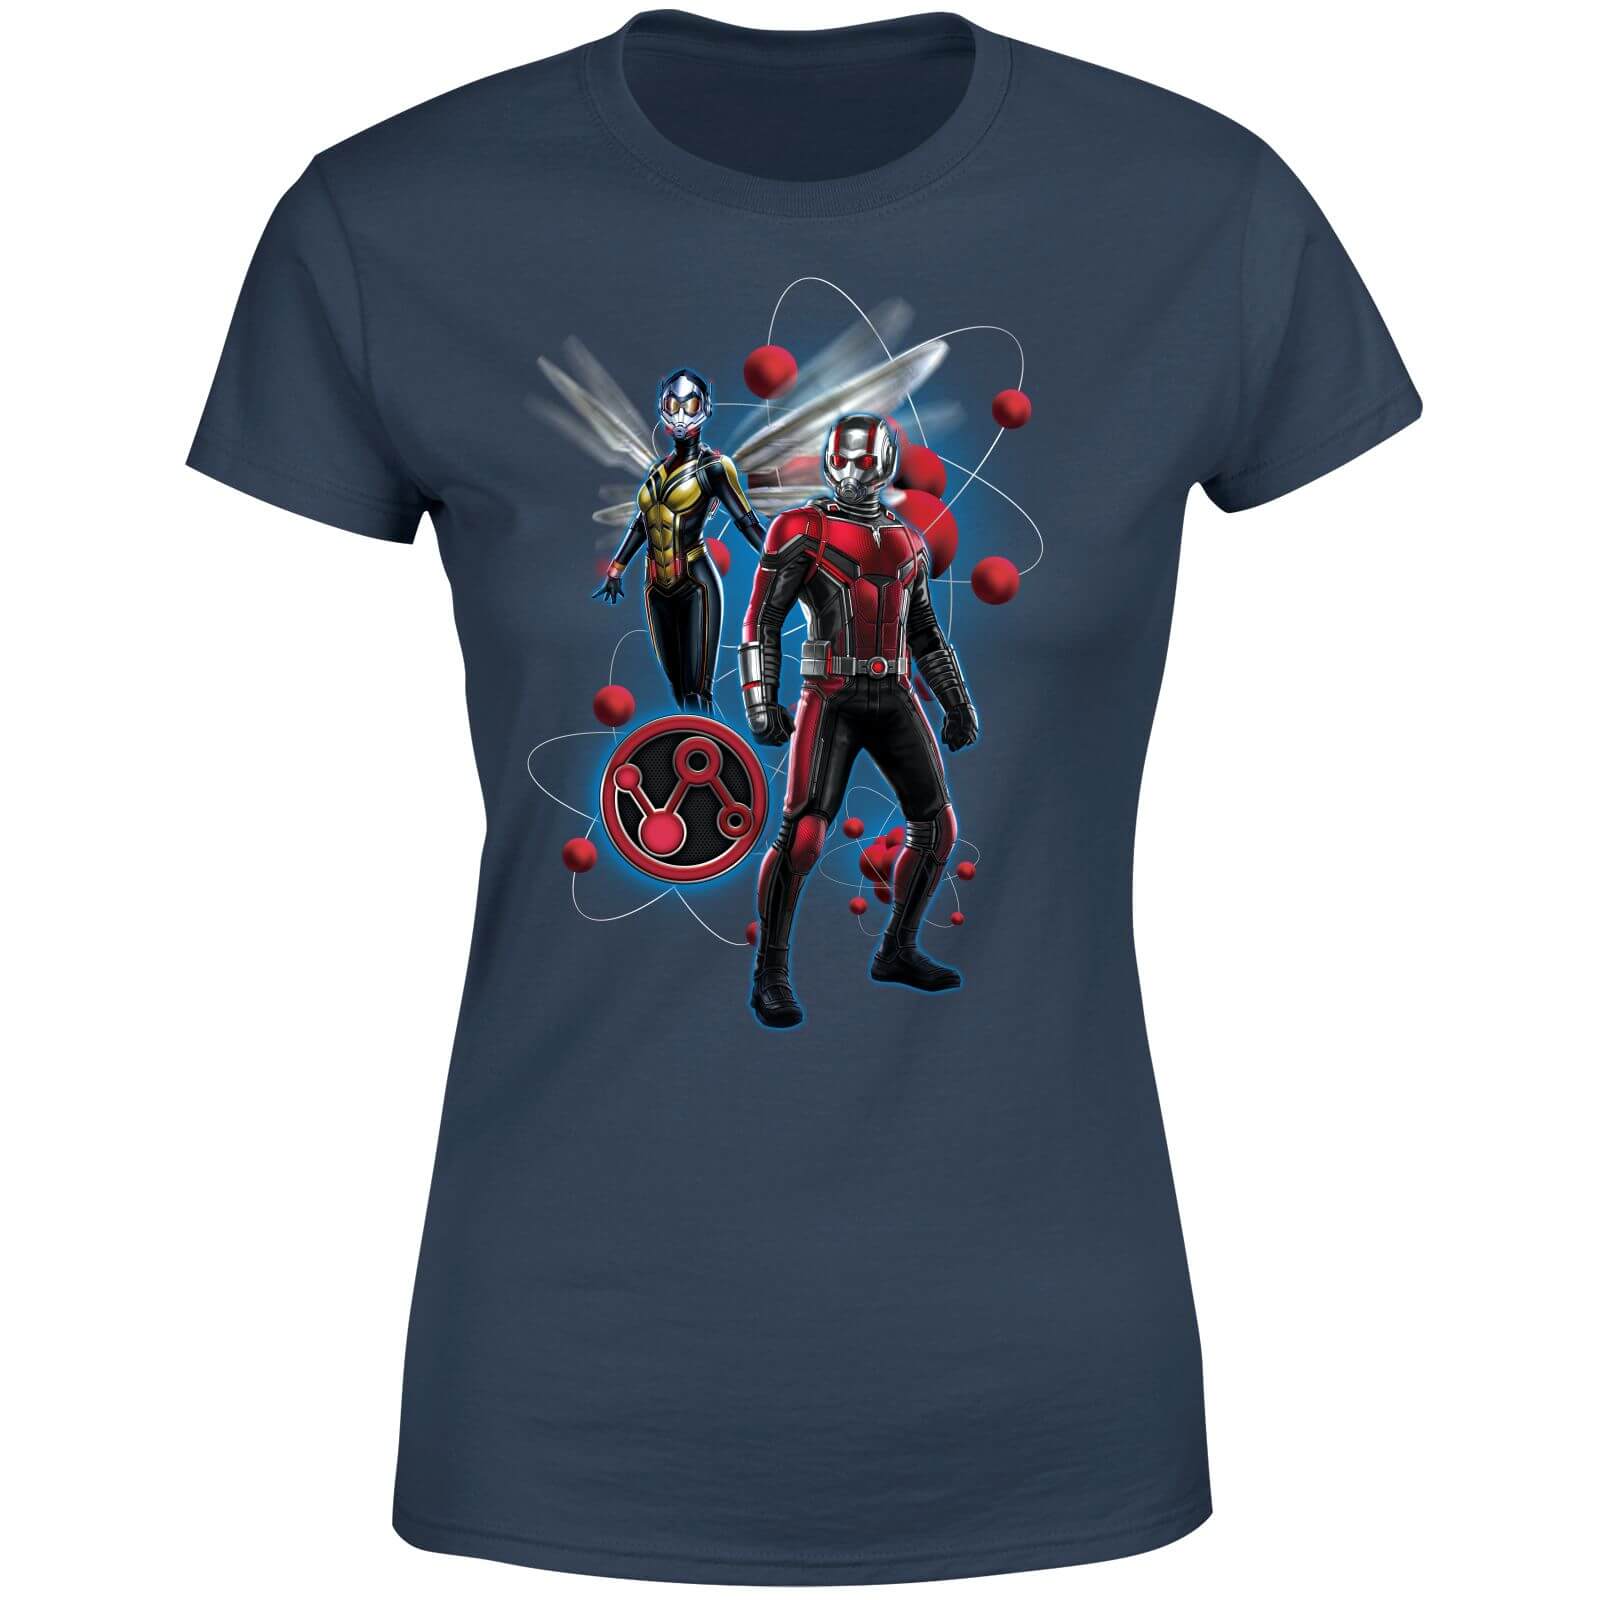 Ant-Man And The Wasp Particle Pose Women's T-Shirt - Navy - Xl